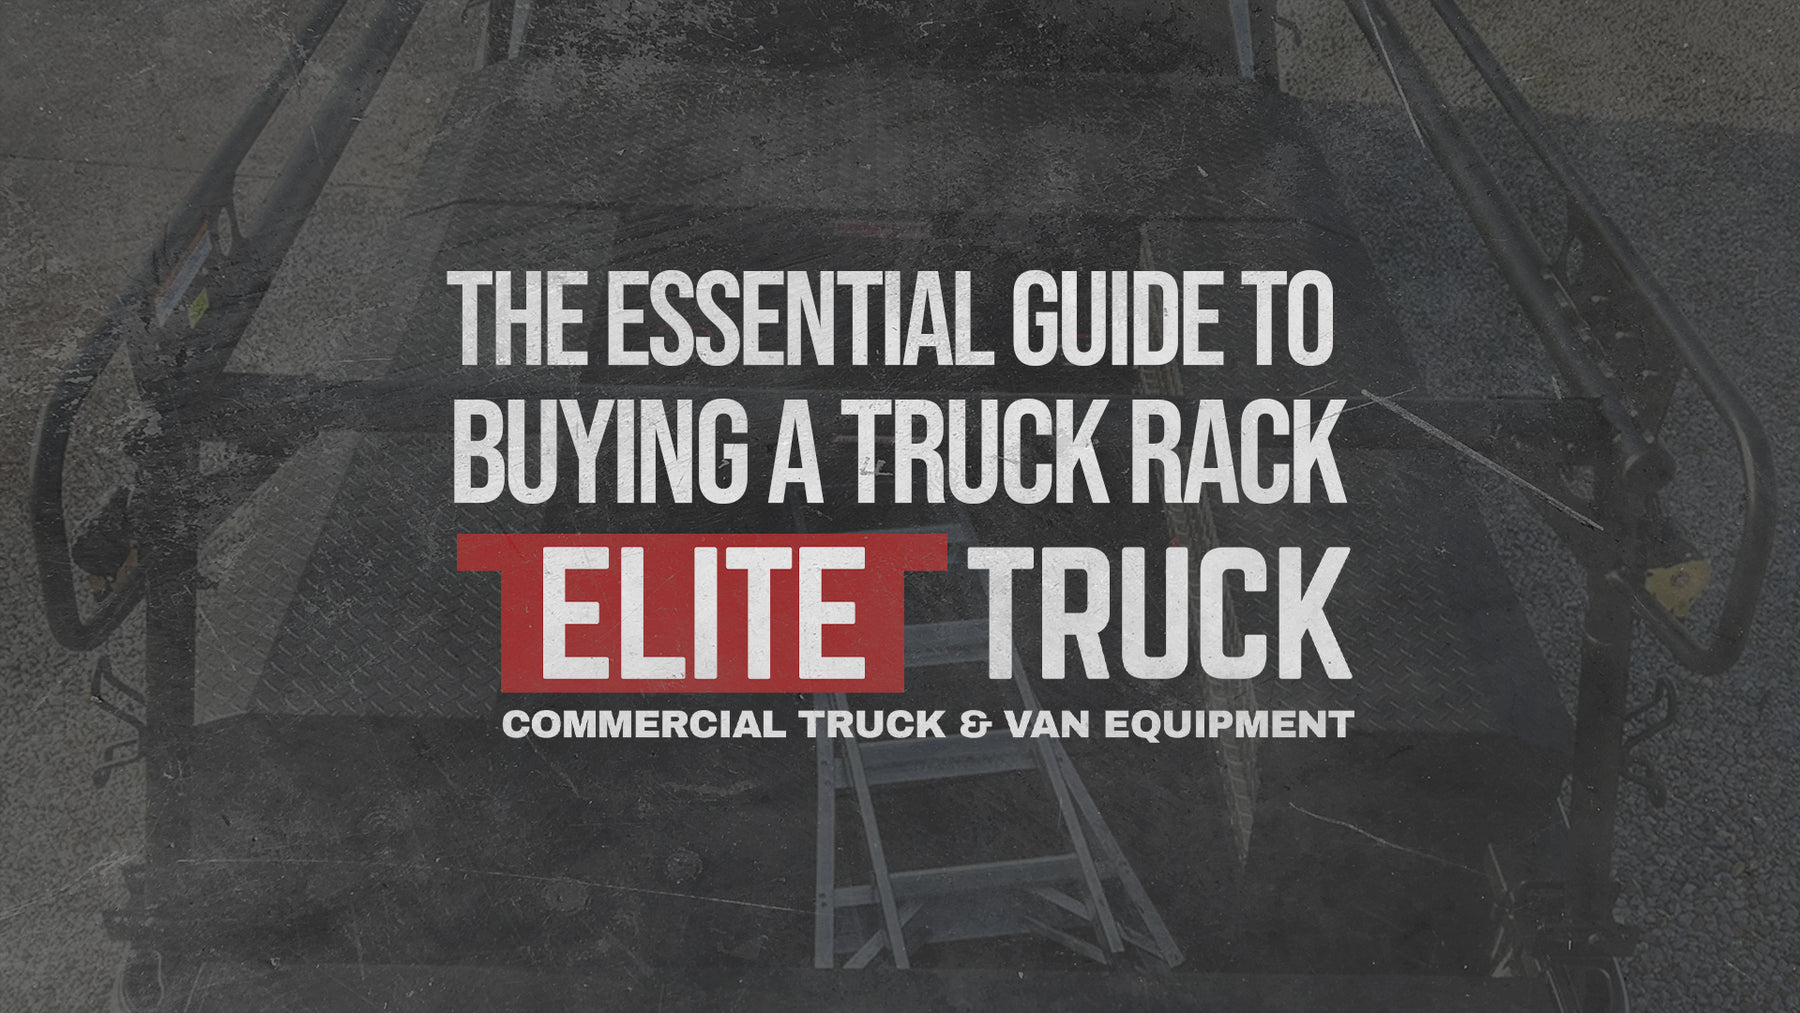 The Essential Guide to Buying a Truck Rack